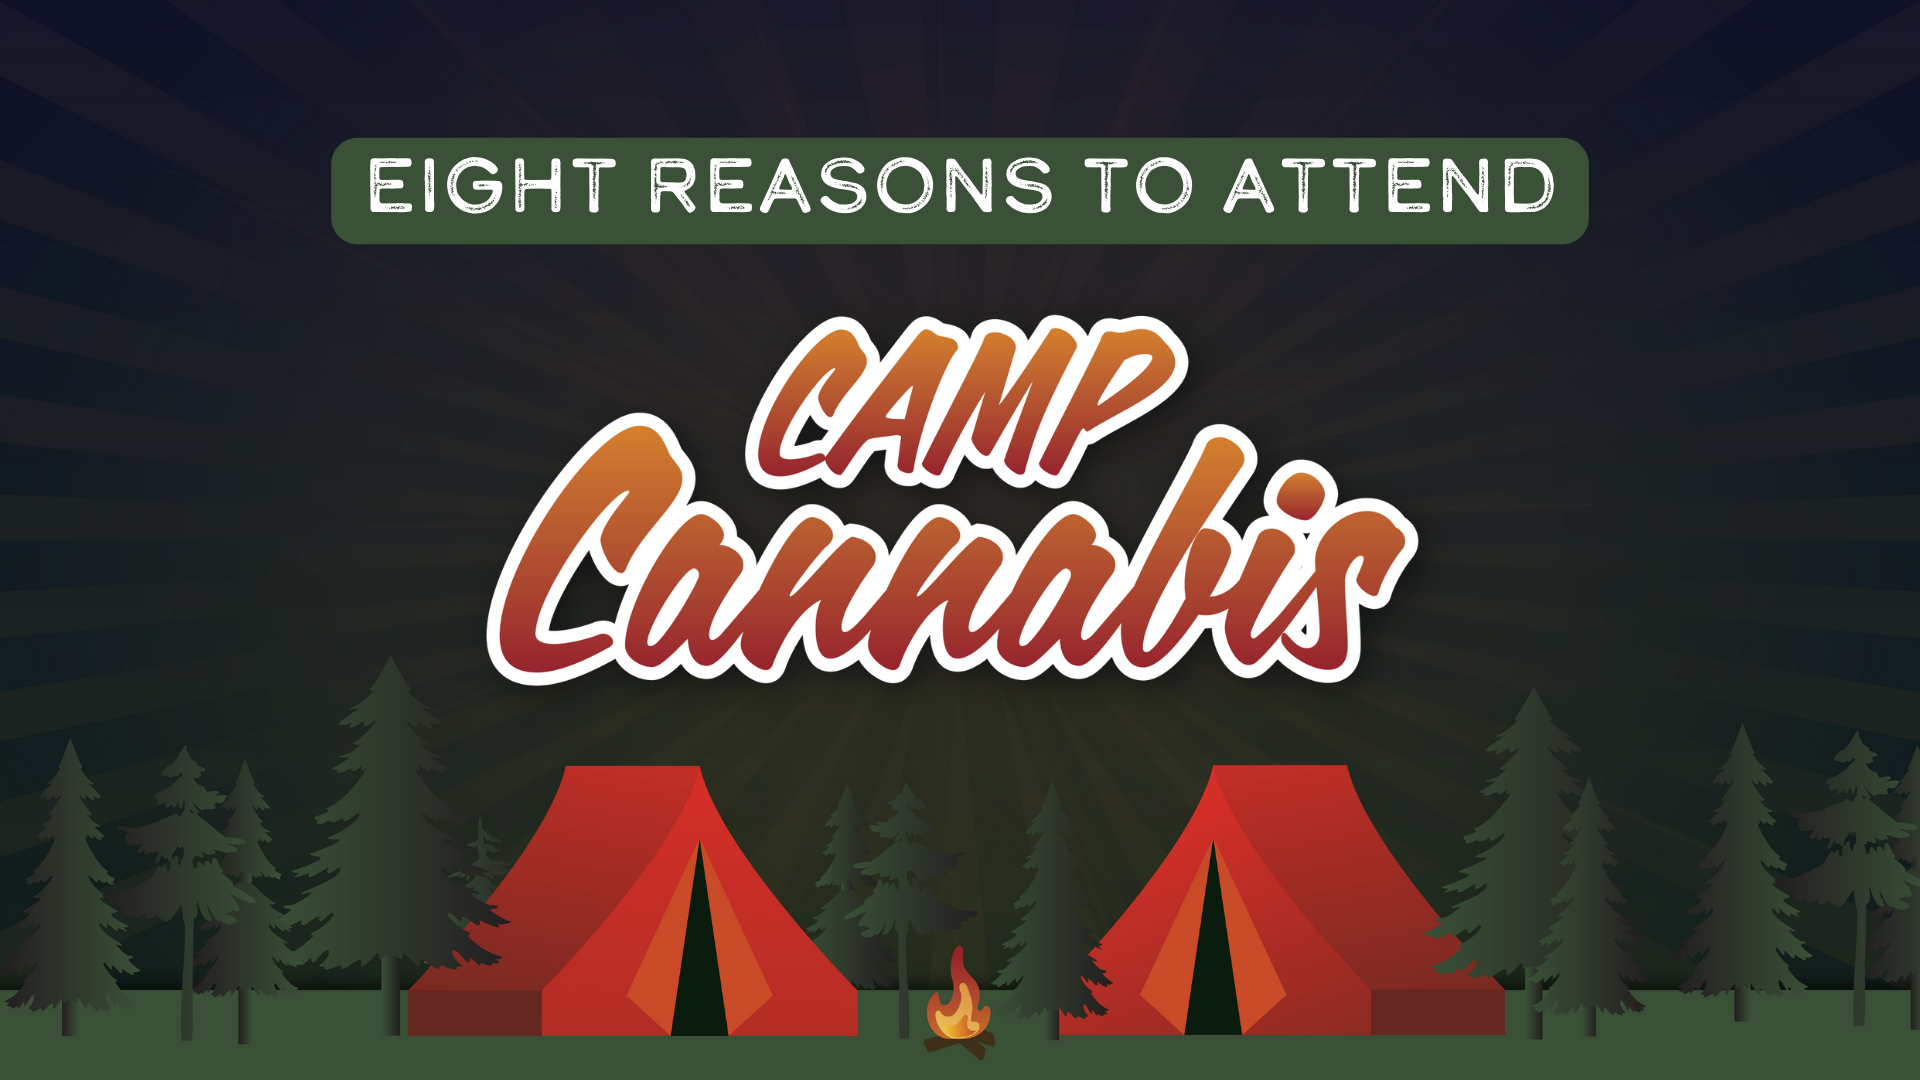 8 reasons to attend Camp Cannabis